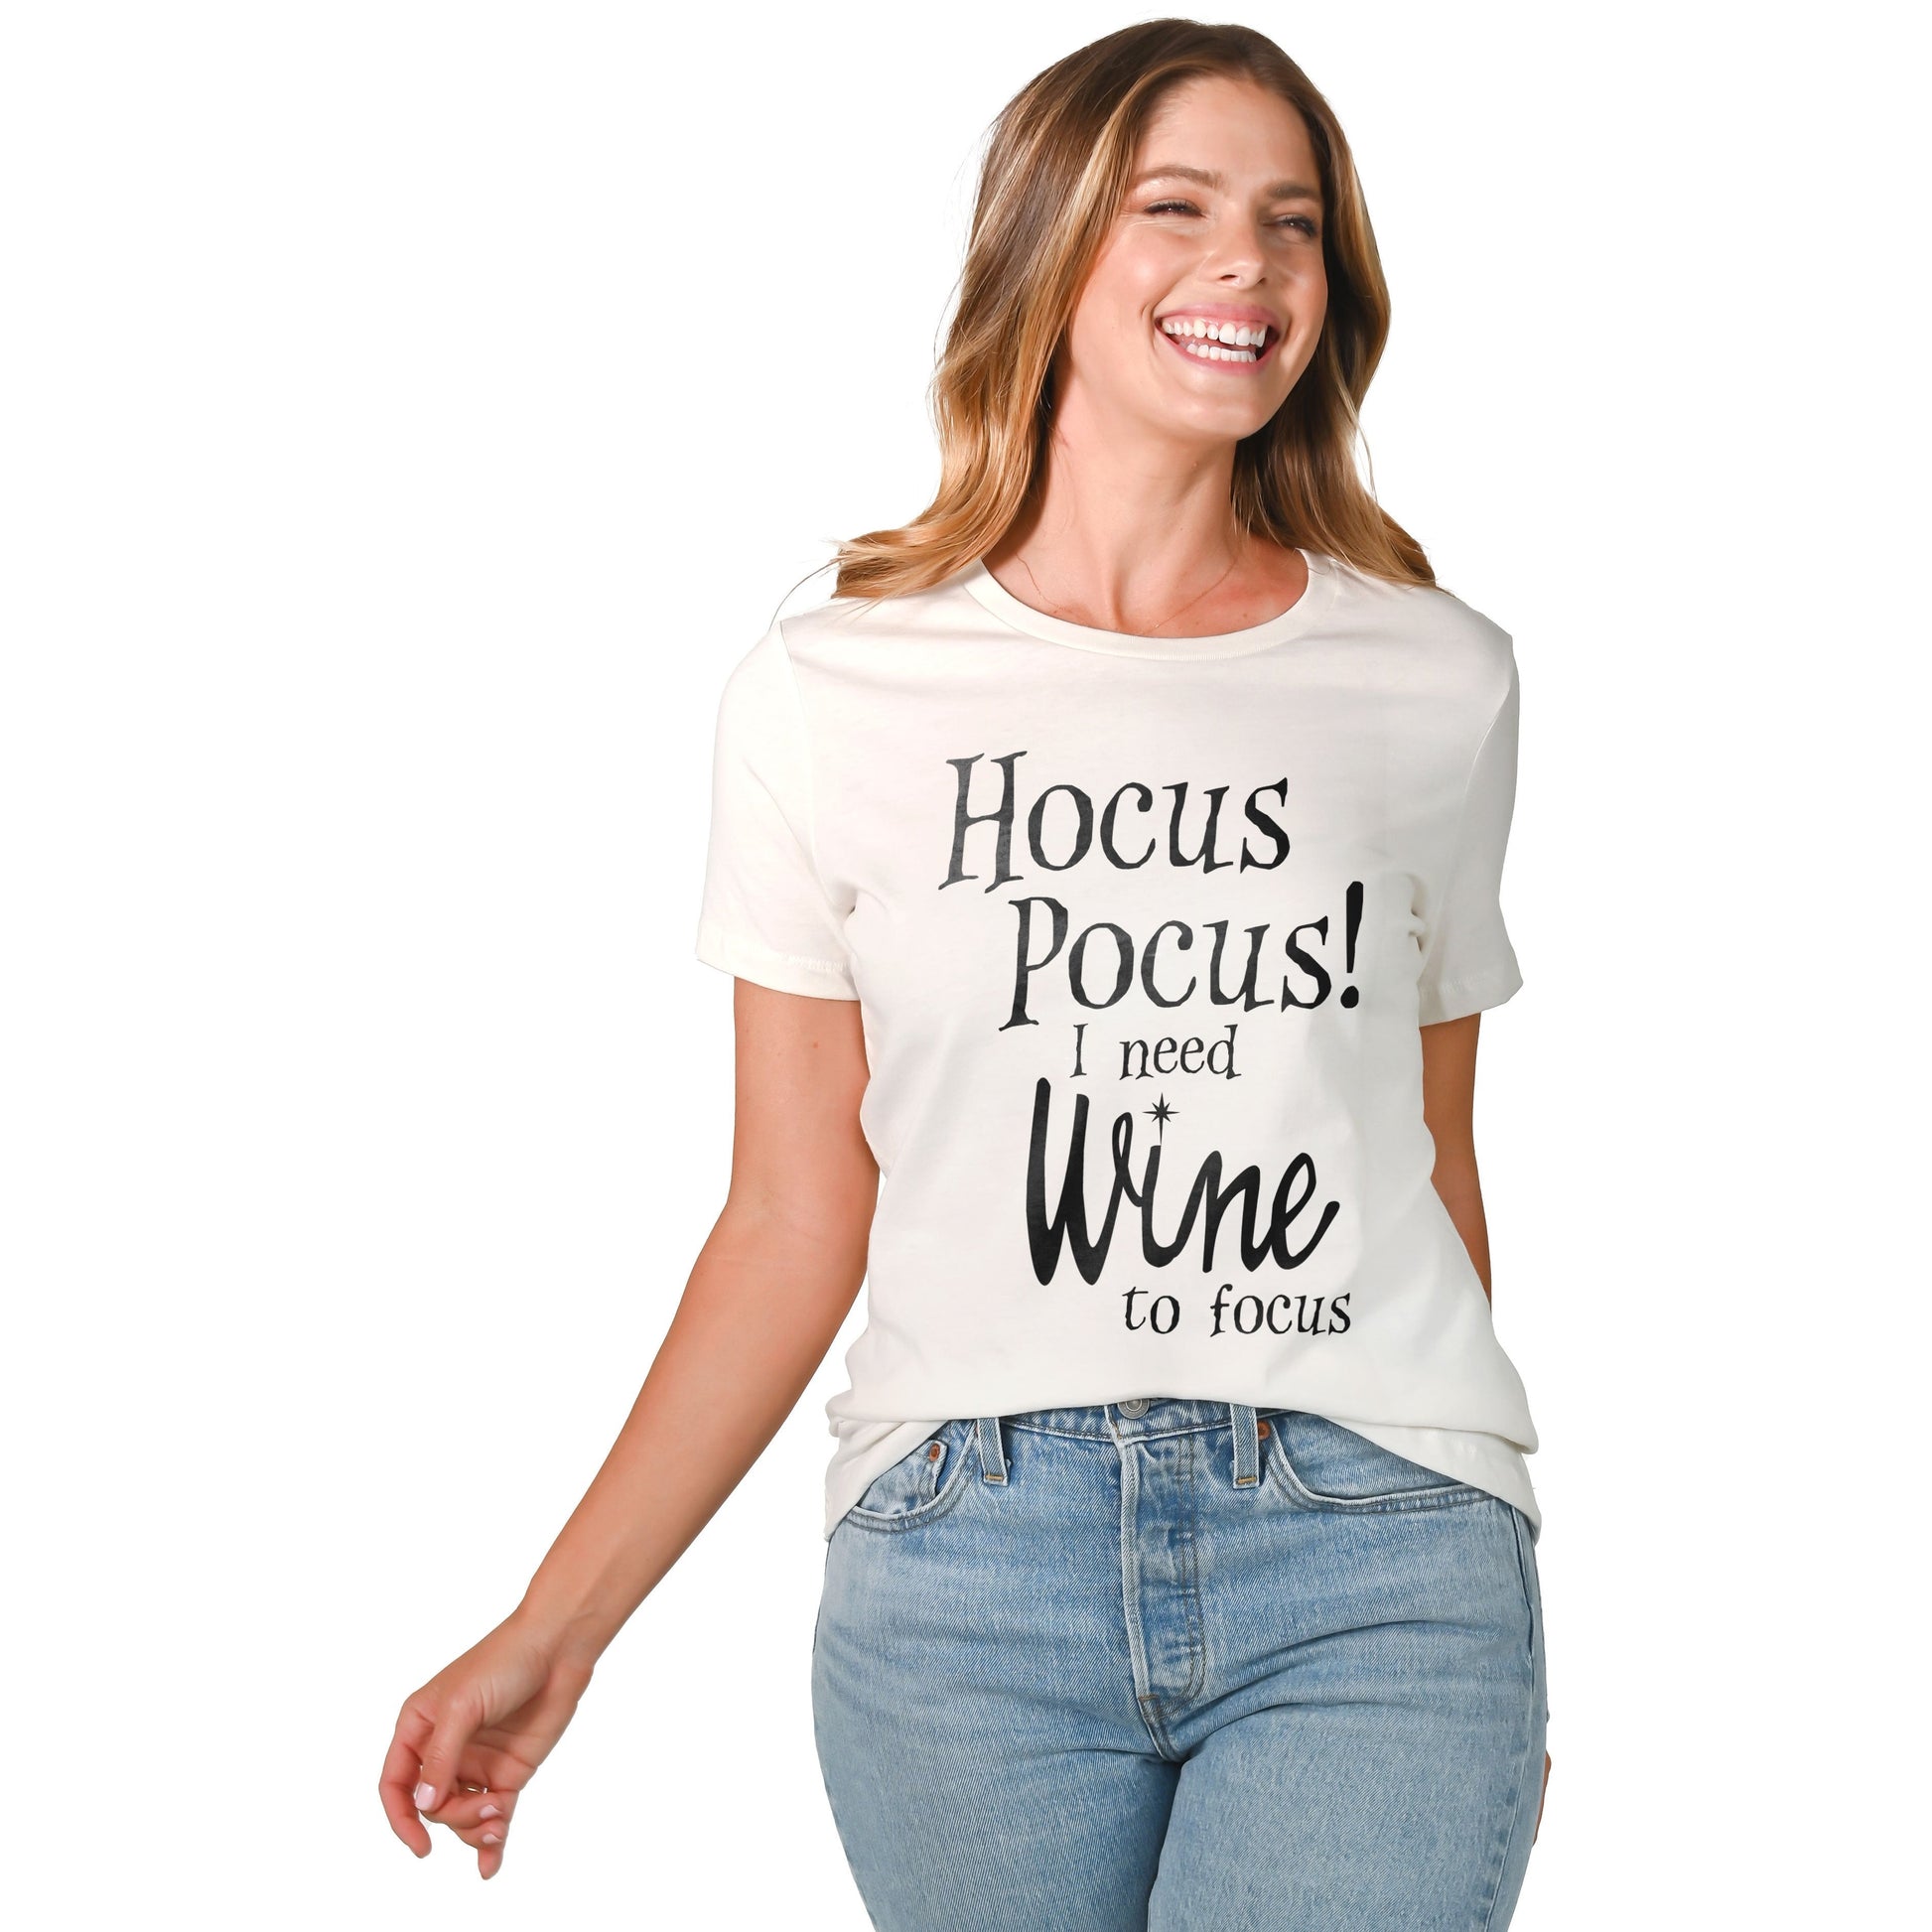 Hocus Pocus I Need Wine To Focus - thread tank | Stories you can wear.